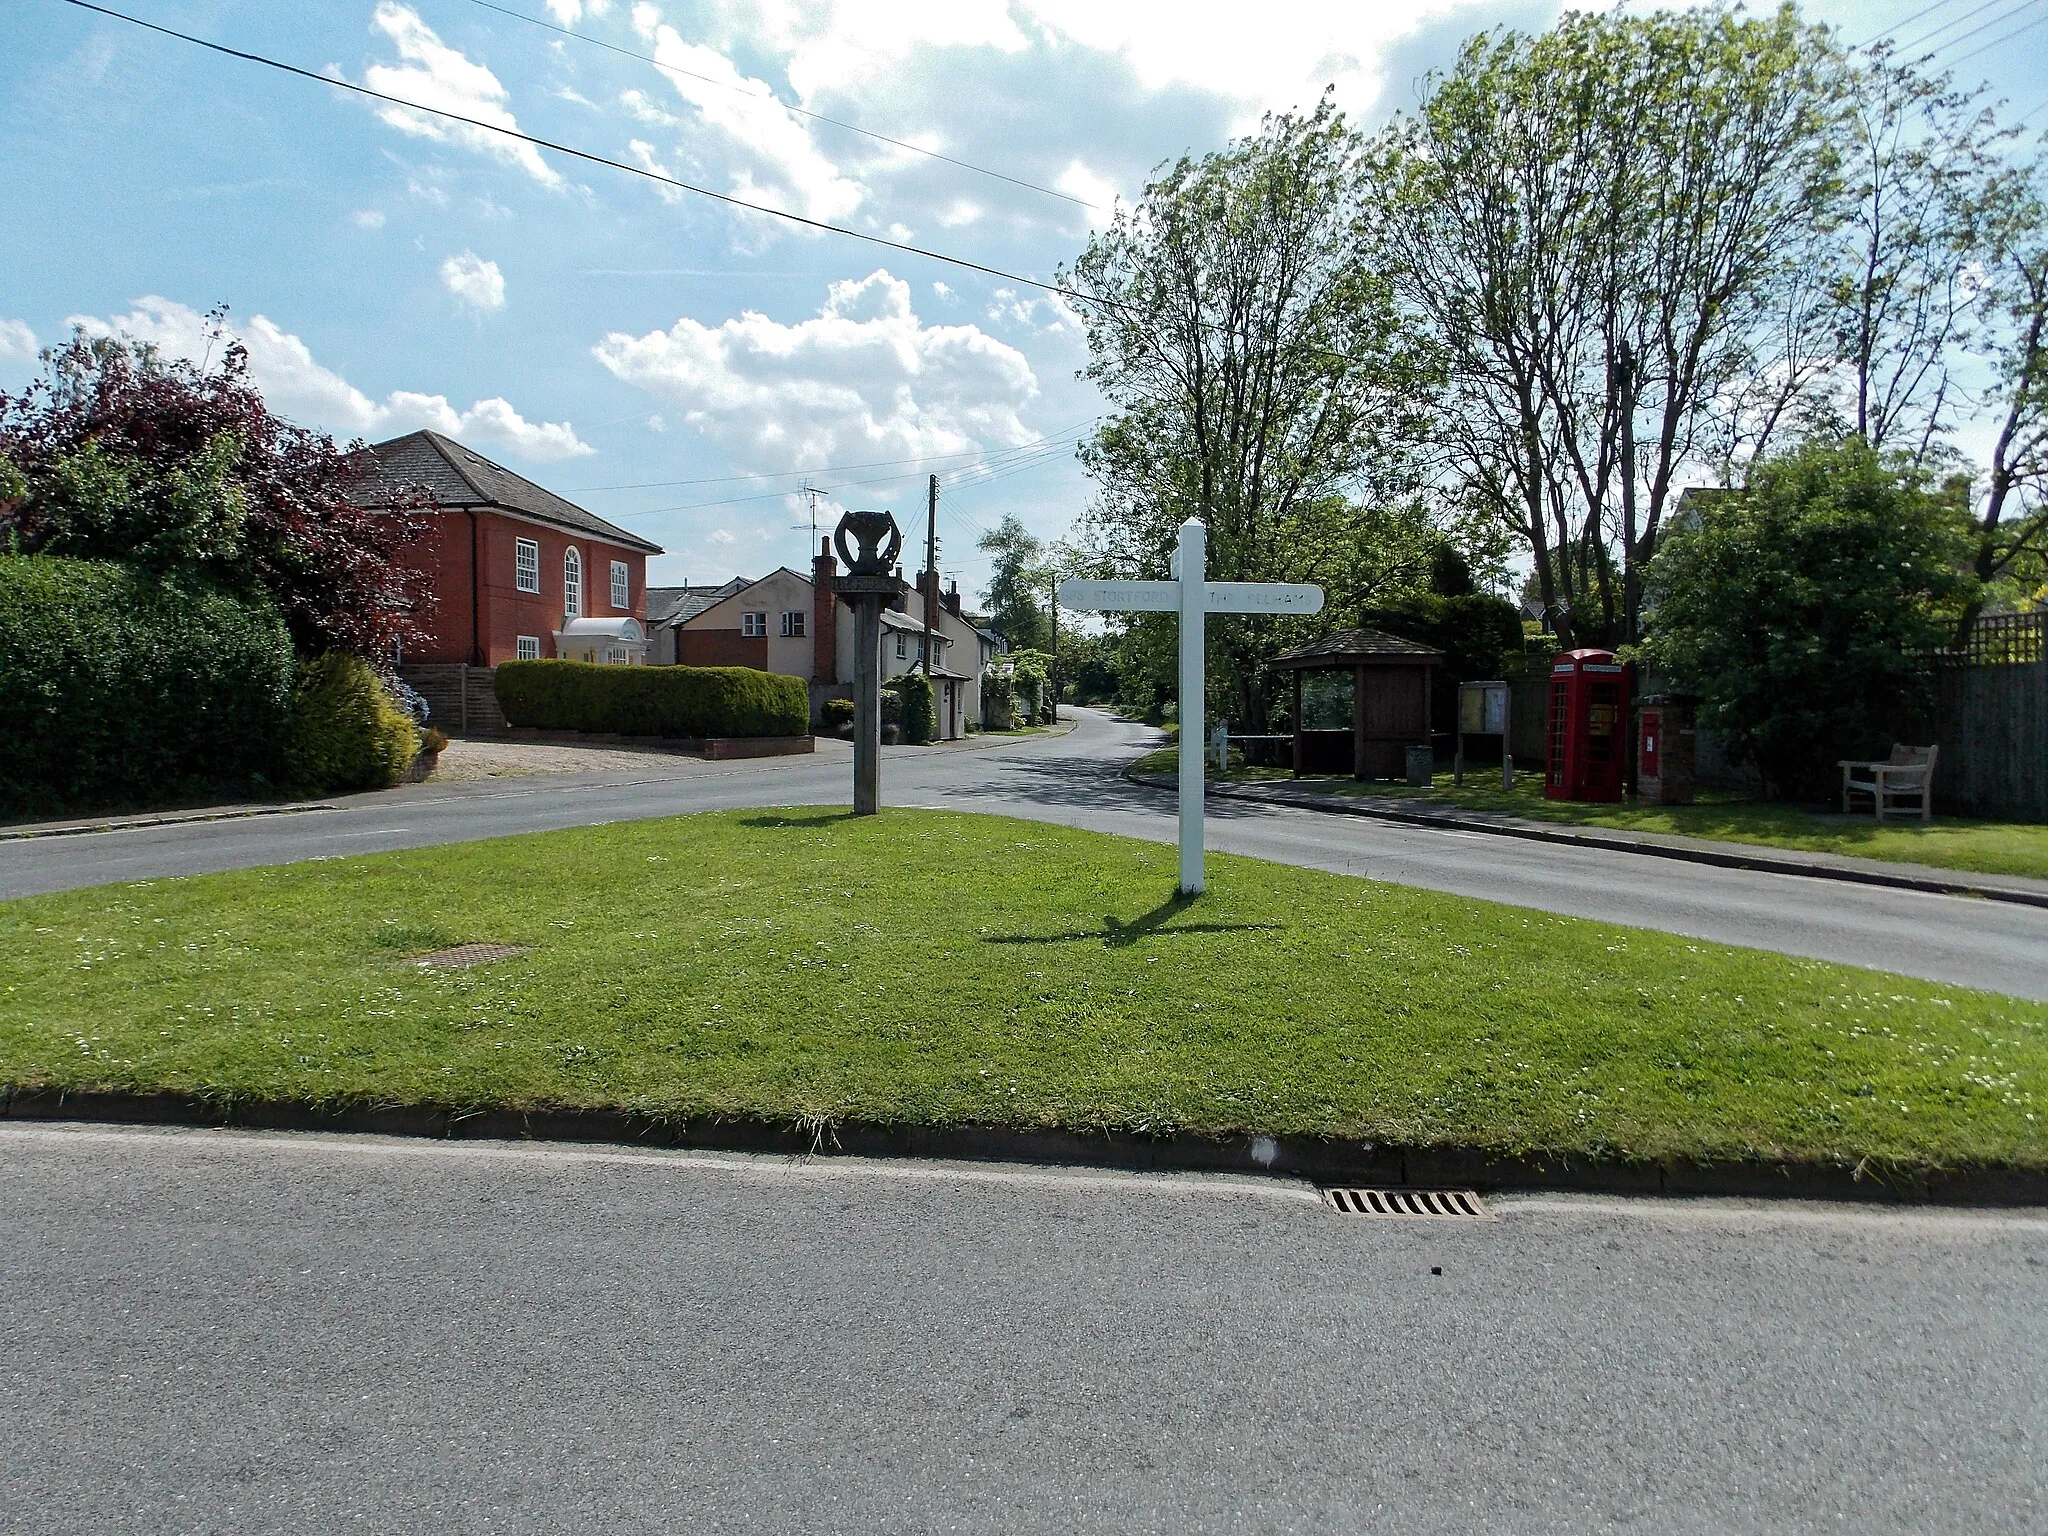 Photo showing: The green triangle road junction of Berden Road and The Street looking south at the centre of the village of Berden, Essex, England. Software: JPEG file optimized and/or cropped and/or spun with DxO OpticsPro 10 Elite and Adobe Photoshop CS2.